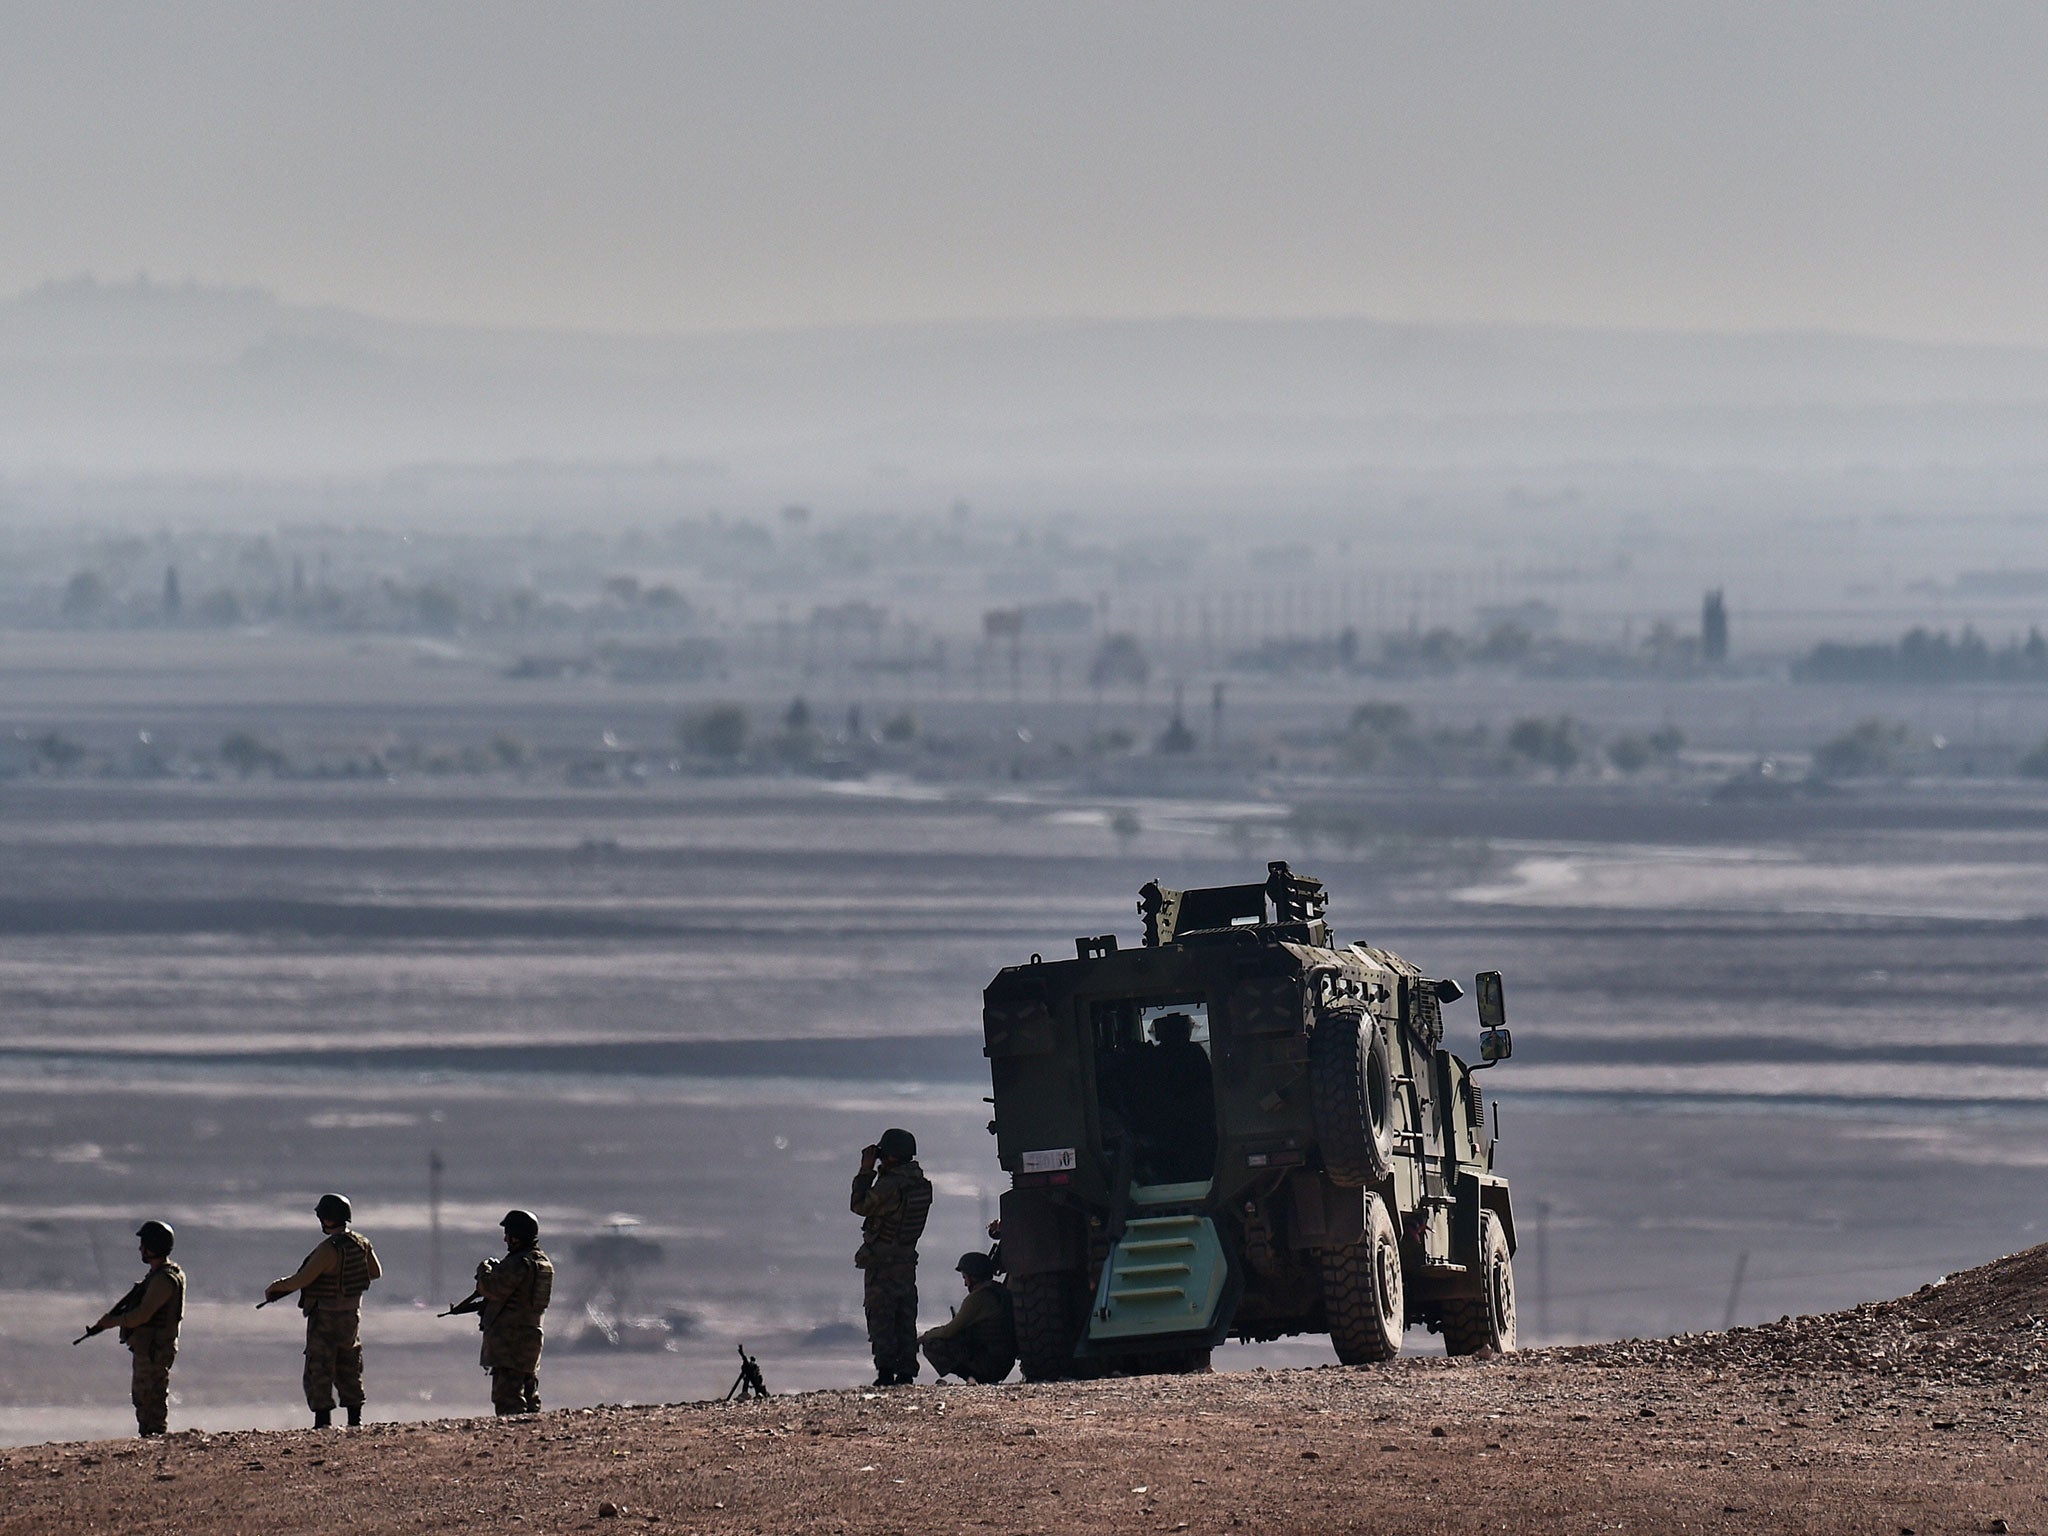 Turkey heavily polices the border with Syria